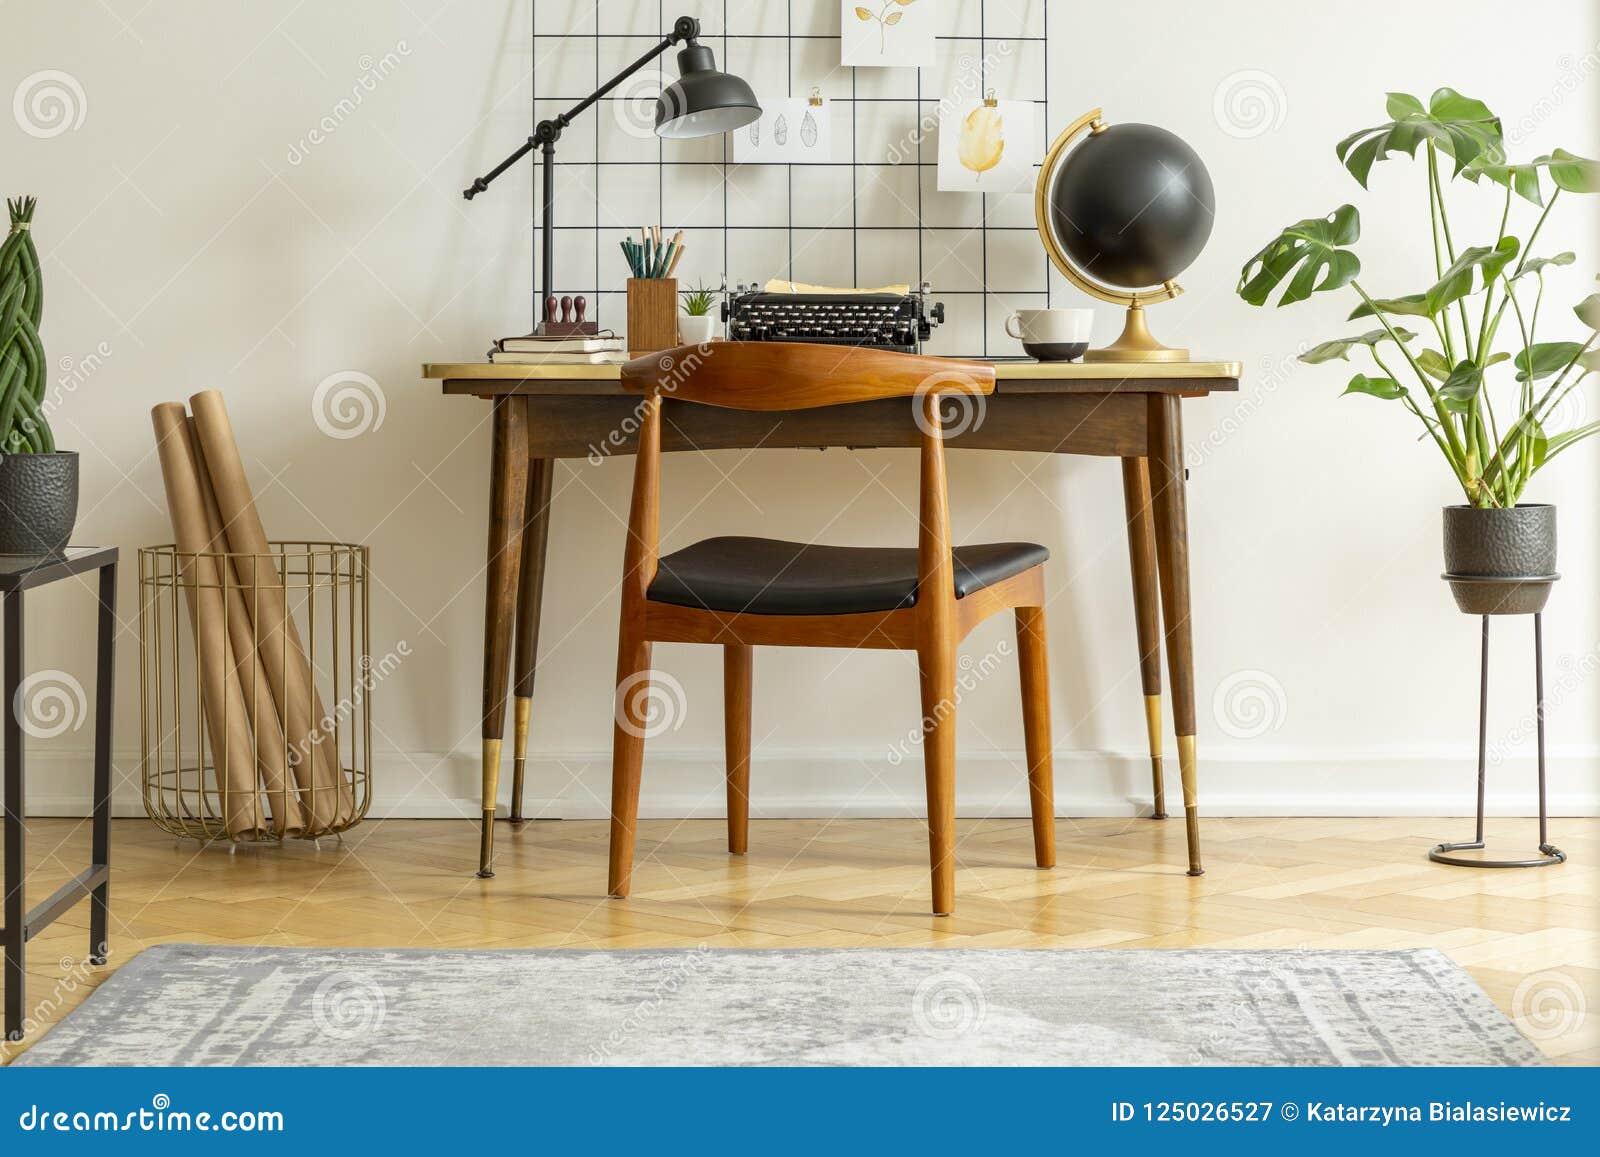 Plant Next To Chair And Desk With Lamp Typewriter And Globe In